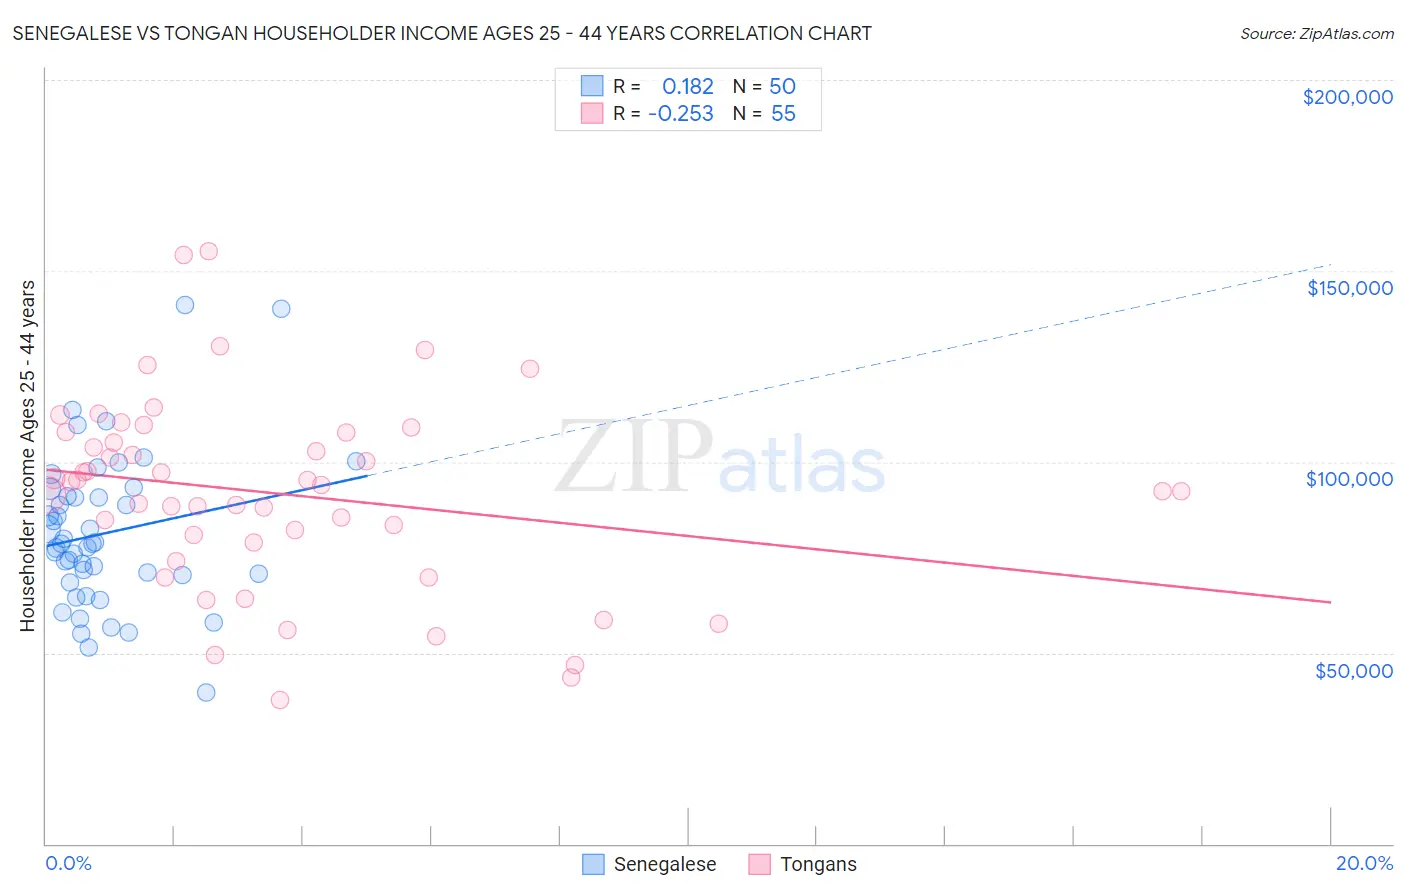 Senegalese vs Tongan Householder Income Ages 25 - 44 years